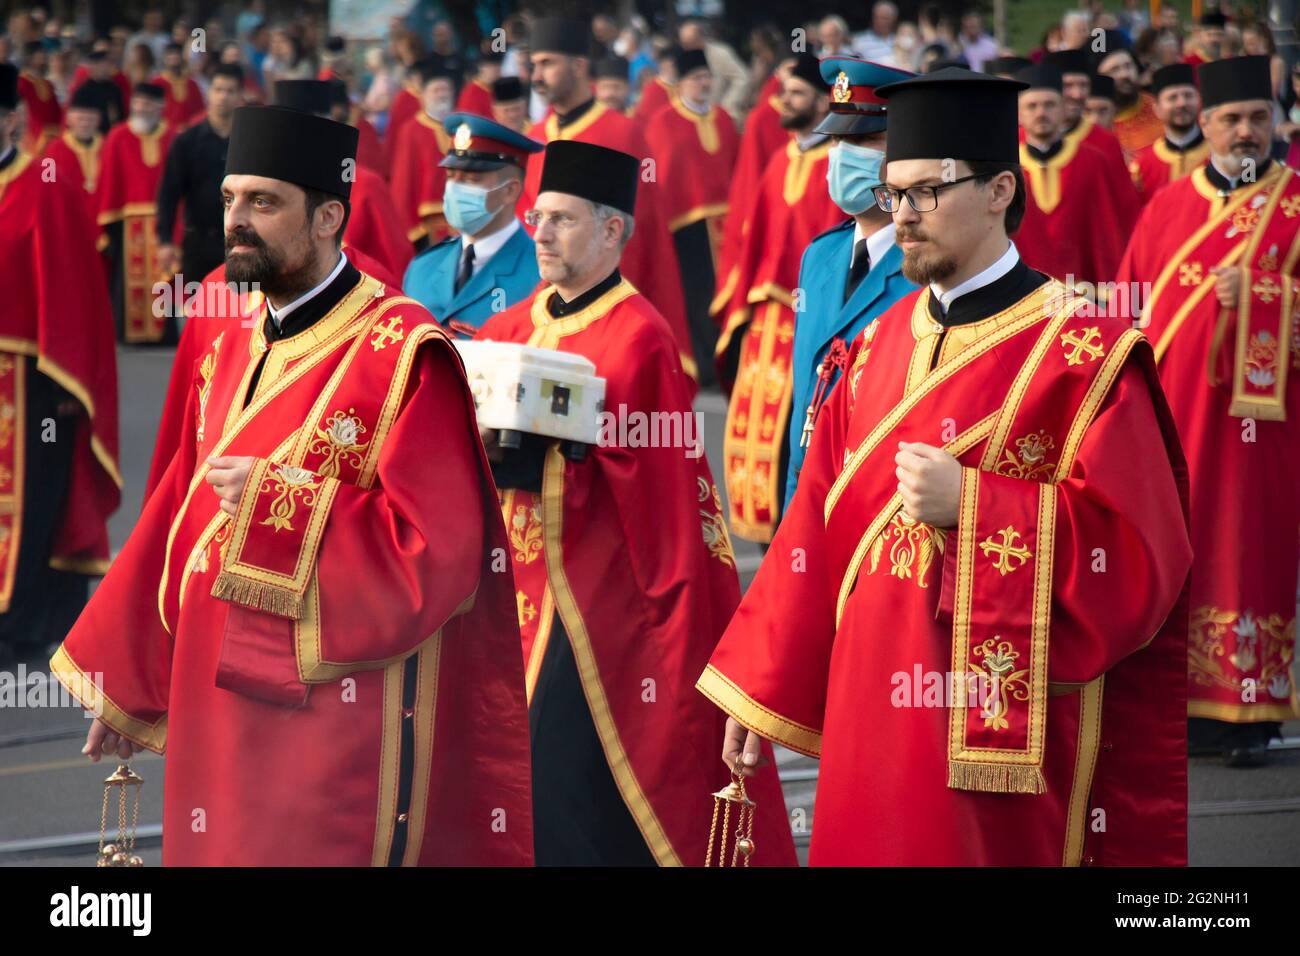 Belgrade, Serbia - June 10, 2021: Serbian orthodox priests and armed forces guardsmen participate in religious procession  to celebrate Belgrade’s Pat Stock Photo